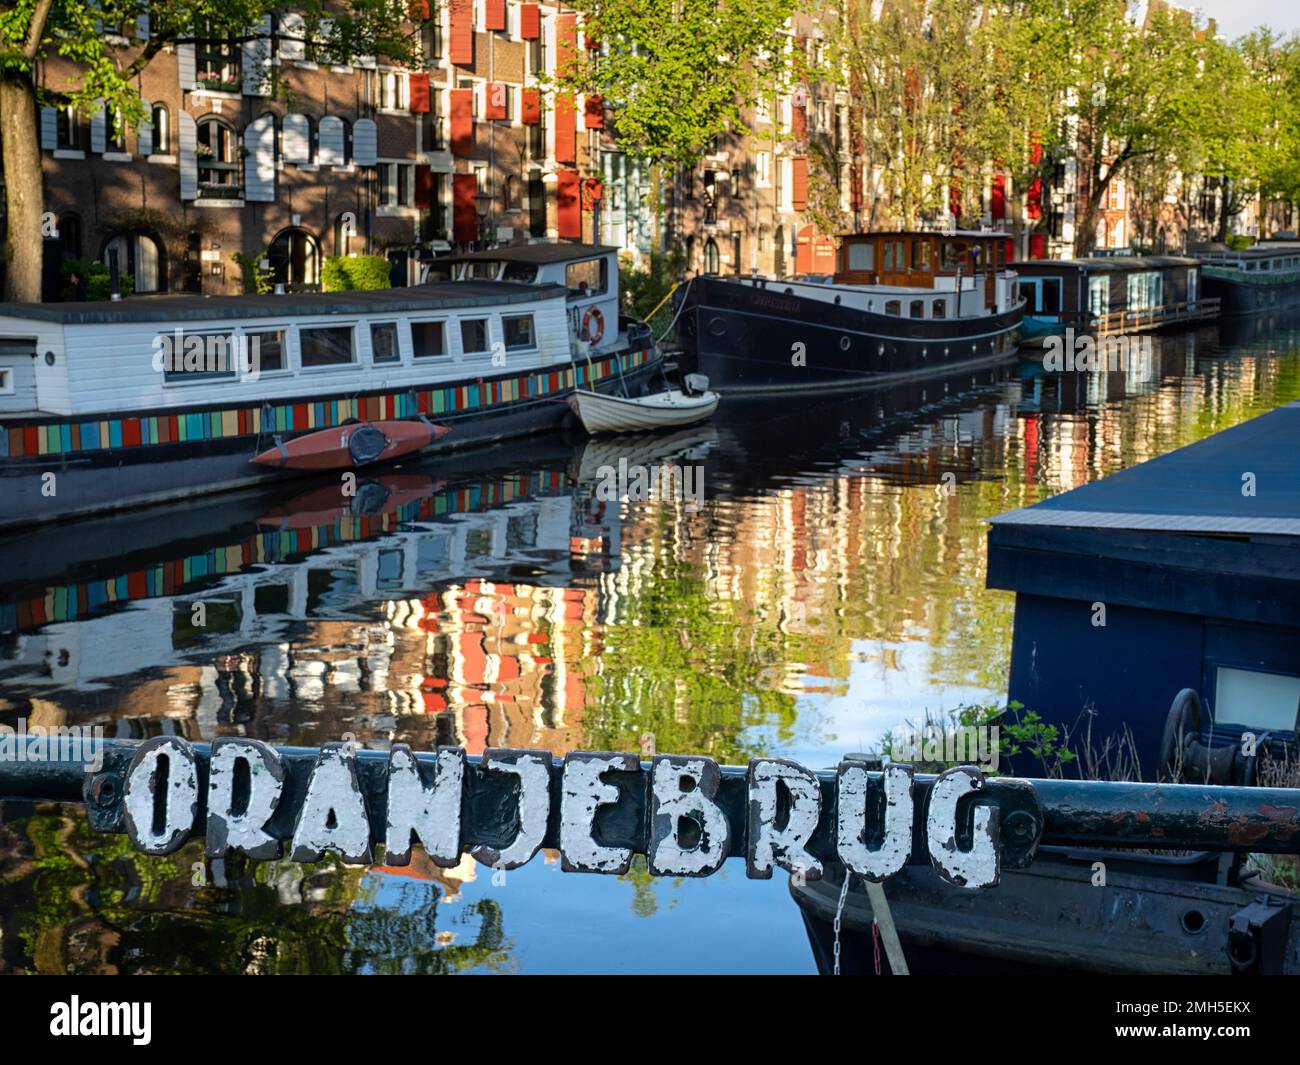 AMSTERDAM, NETHERLANDS - MAY 01, 2018:   Metal sign on the Oranjebrug bridge across the Brouwersgracht canal with a defocused view of boats on the can Stock Photo